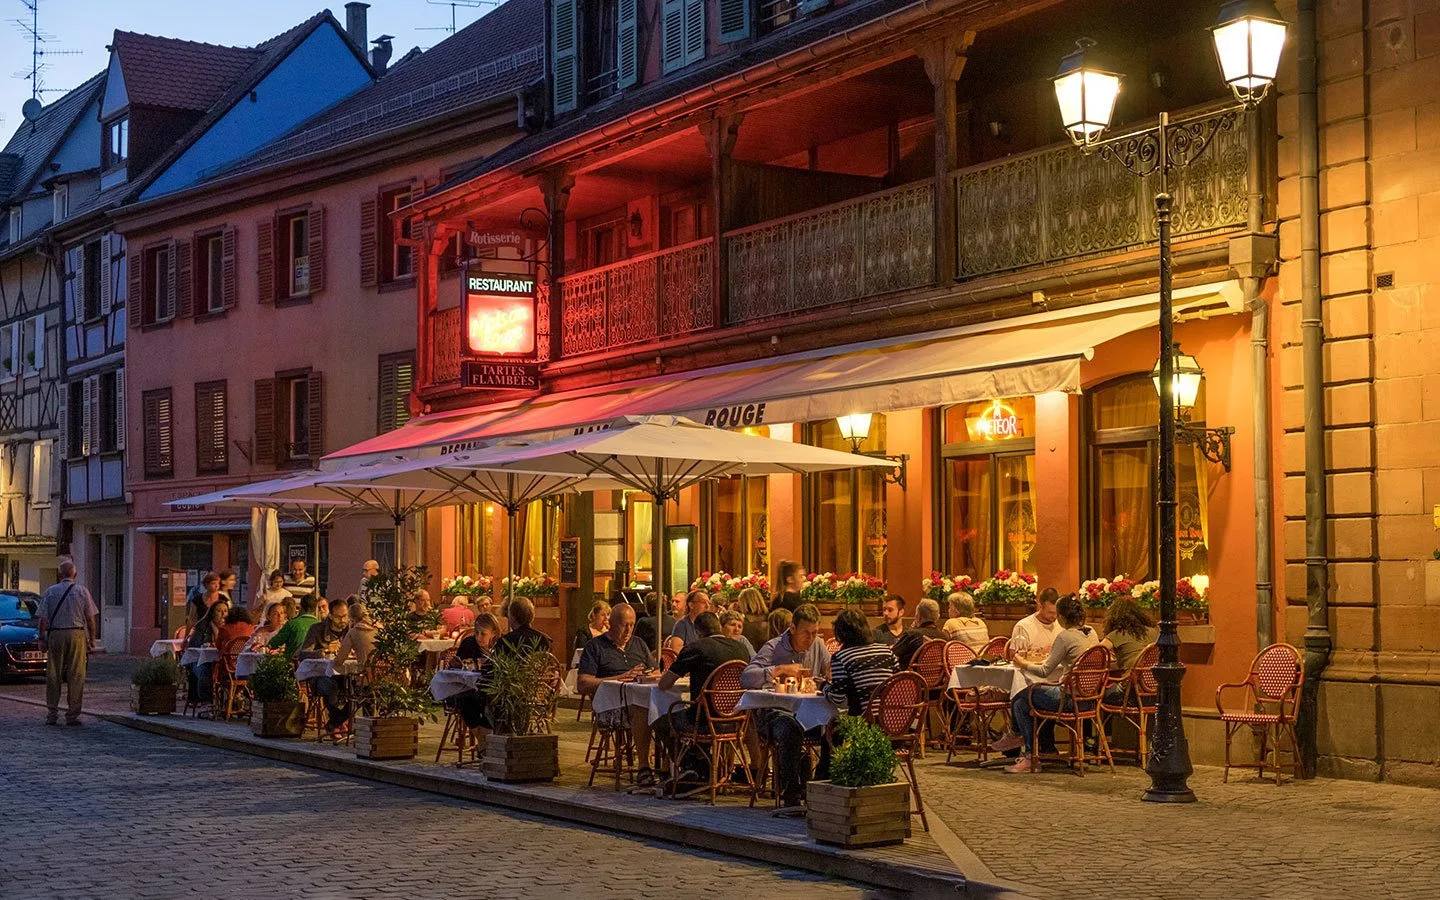 Diners outside a restaurant visiting Colmar, Alsace